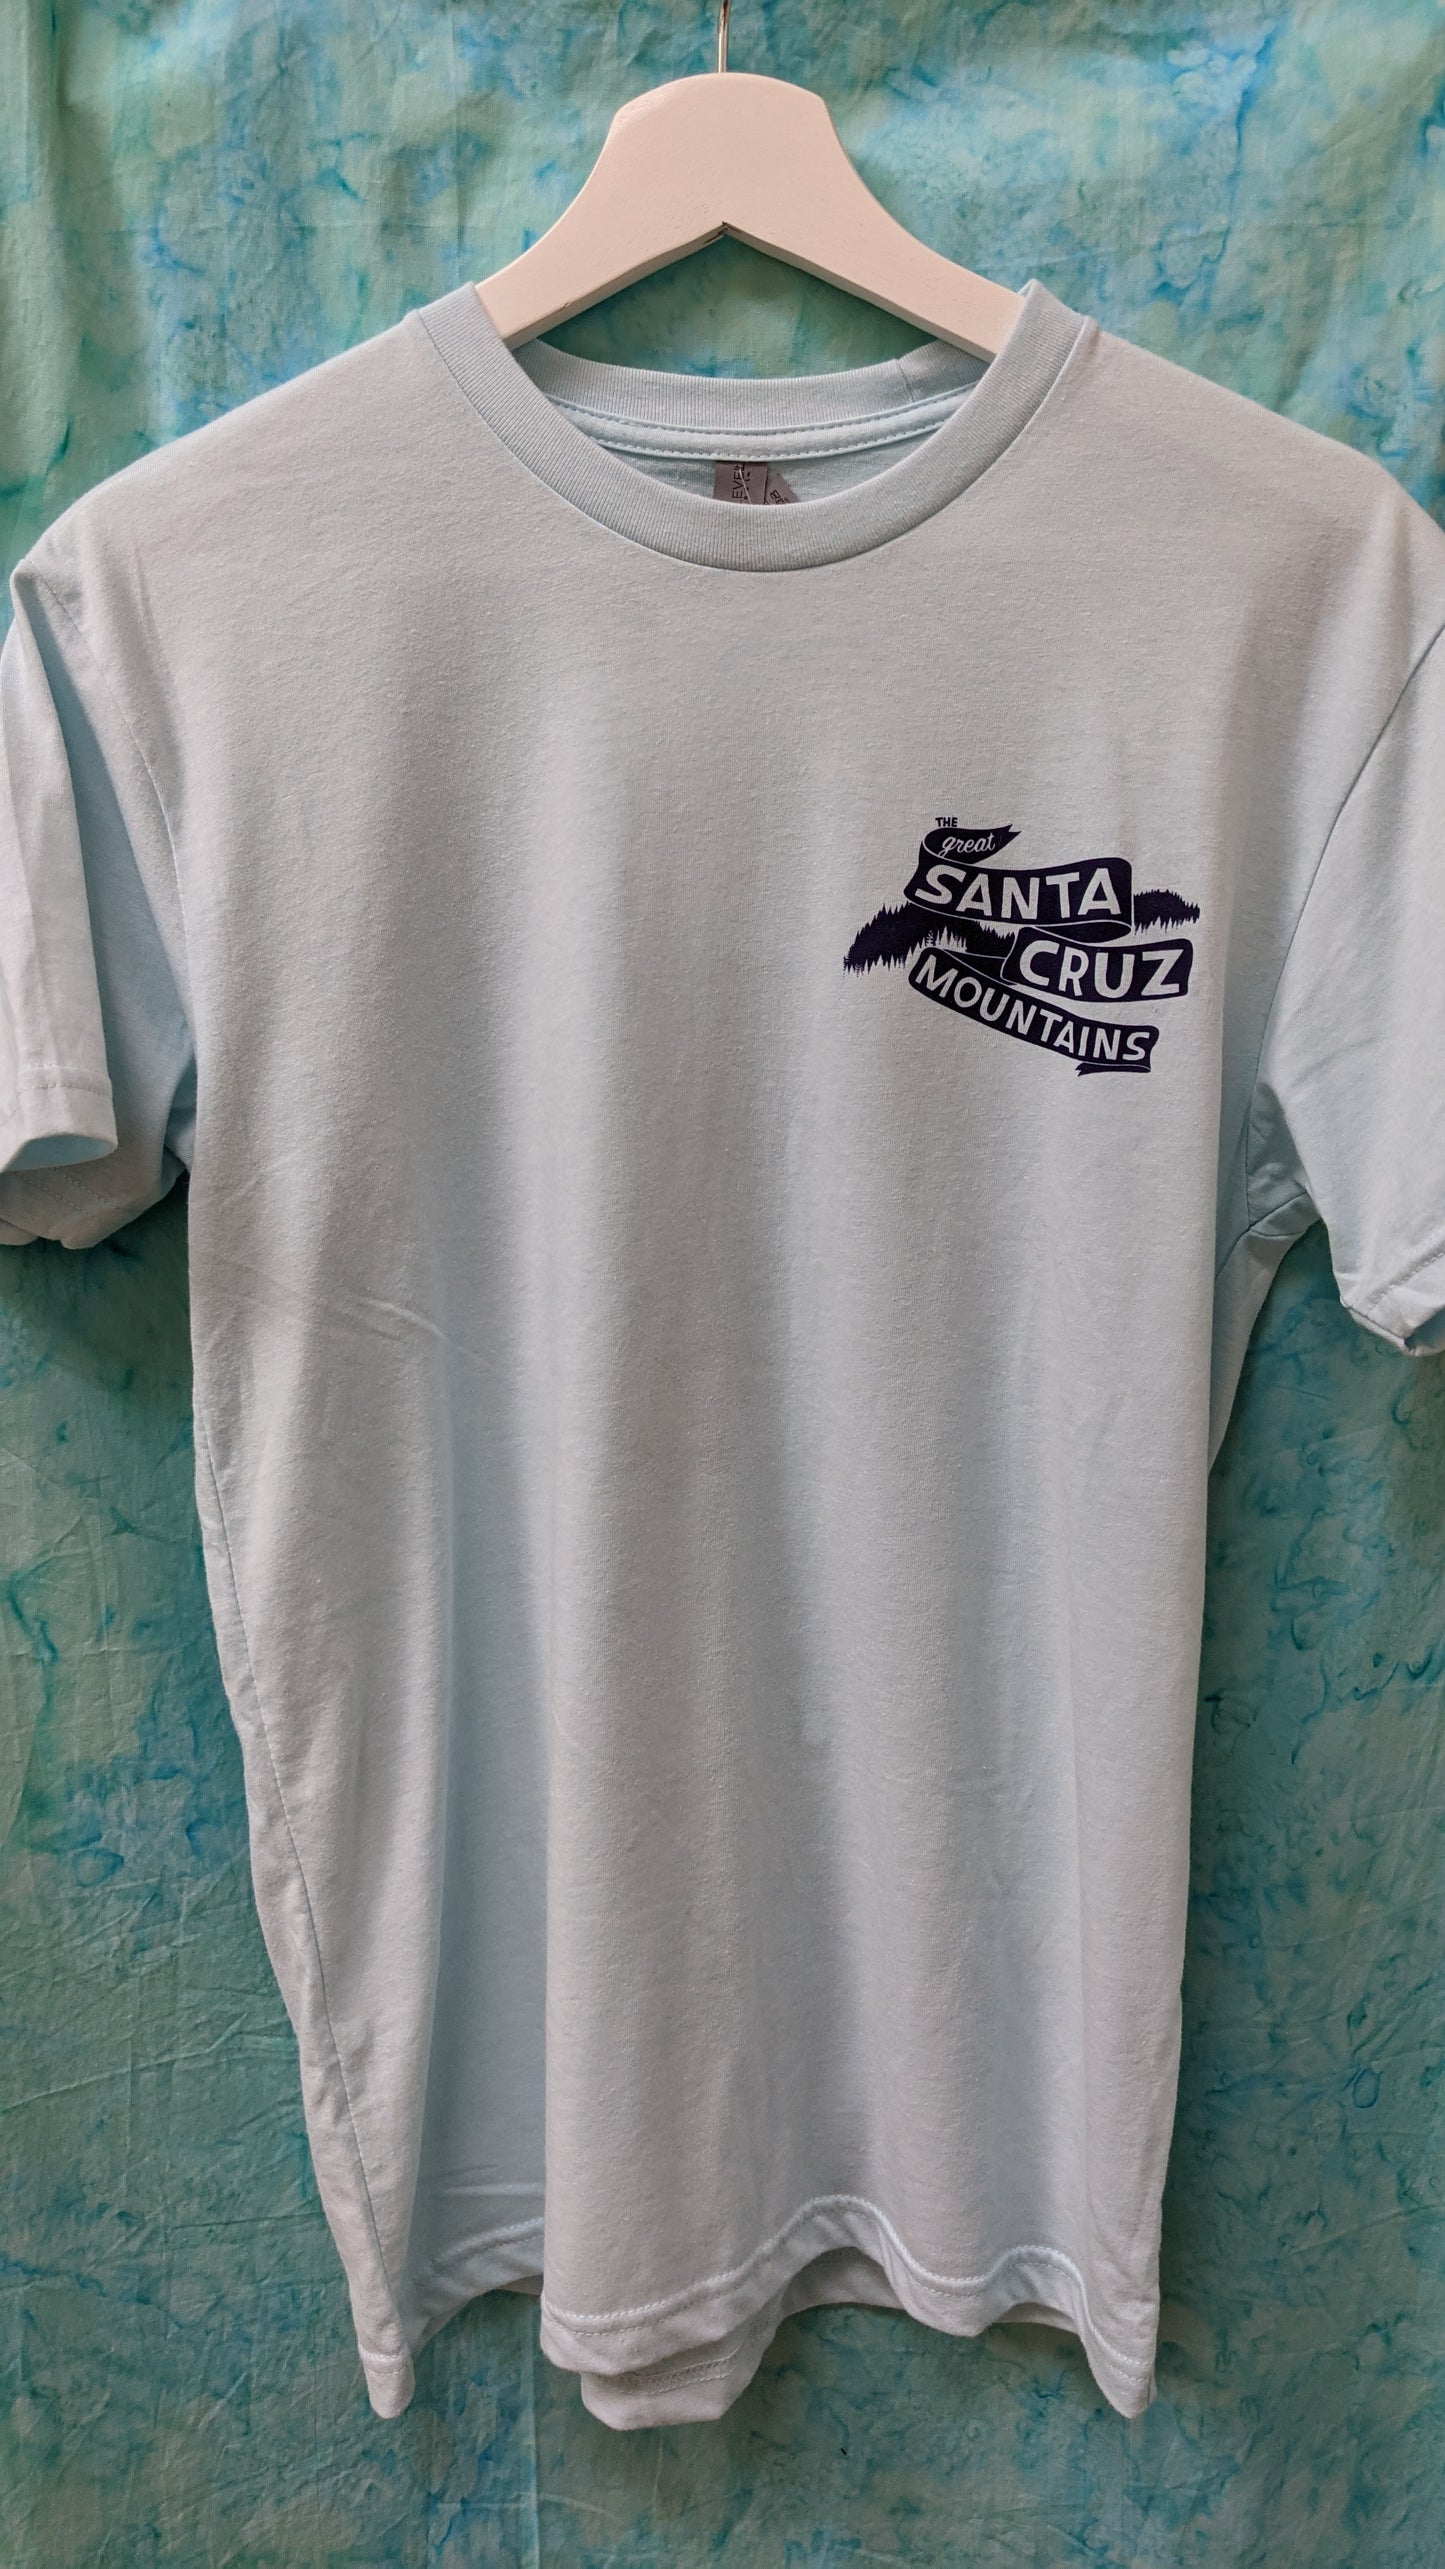 Front of ice blue shirt design by Great Santa Cruz Mountains